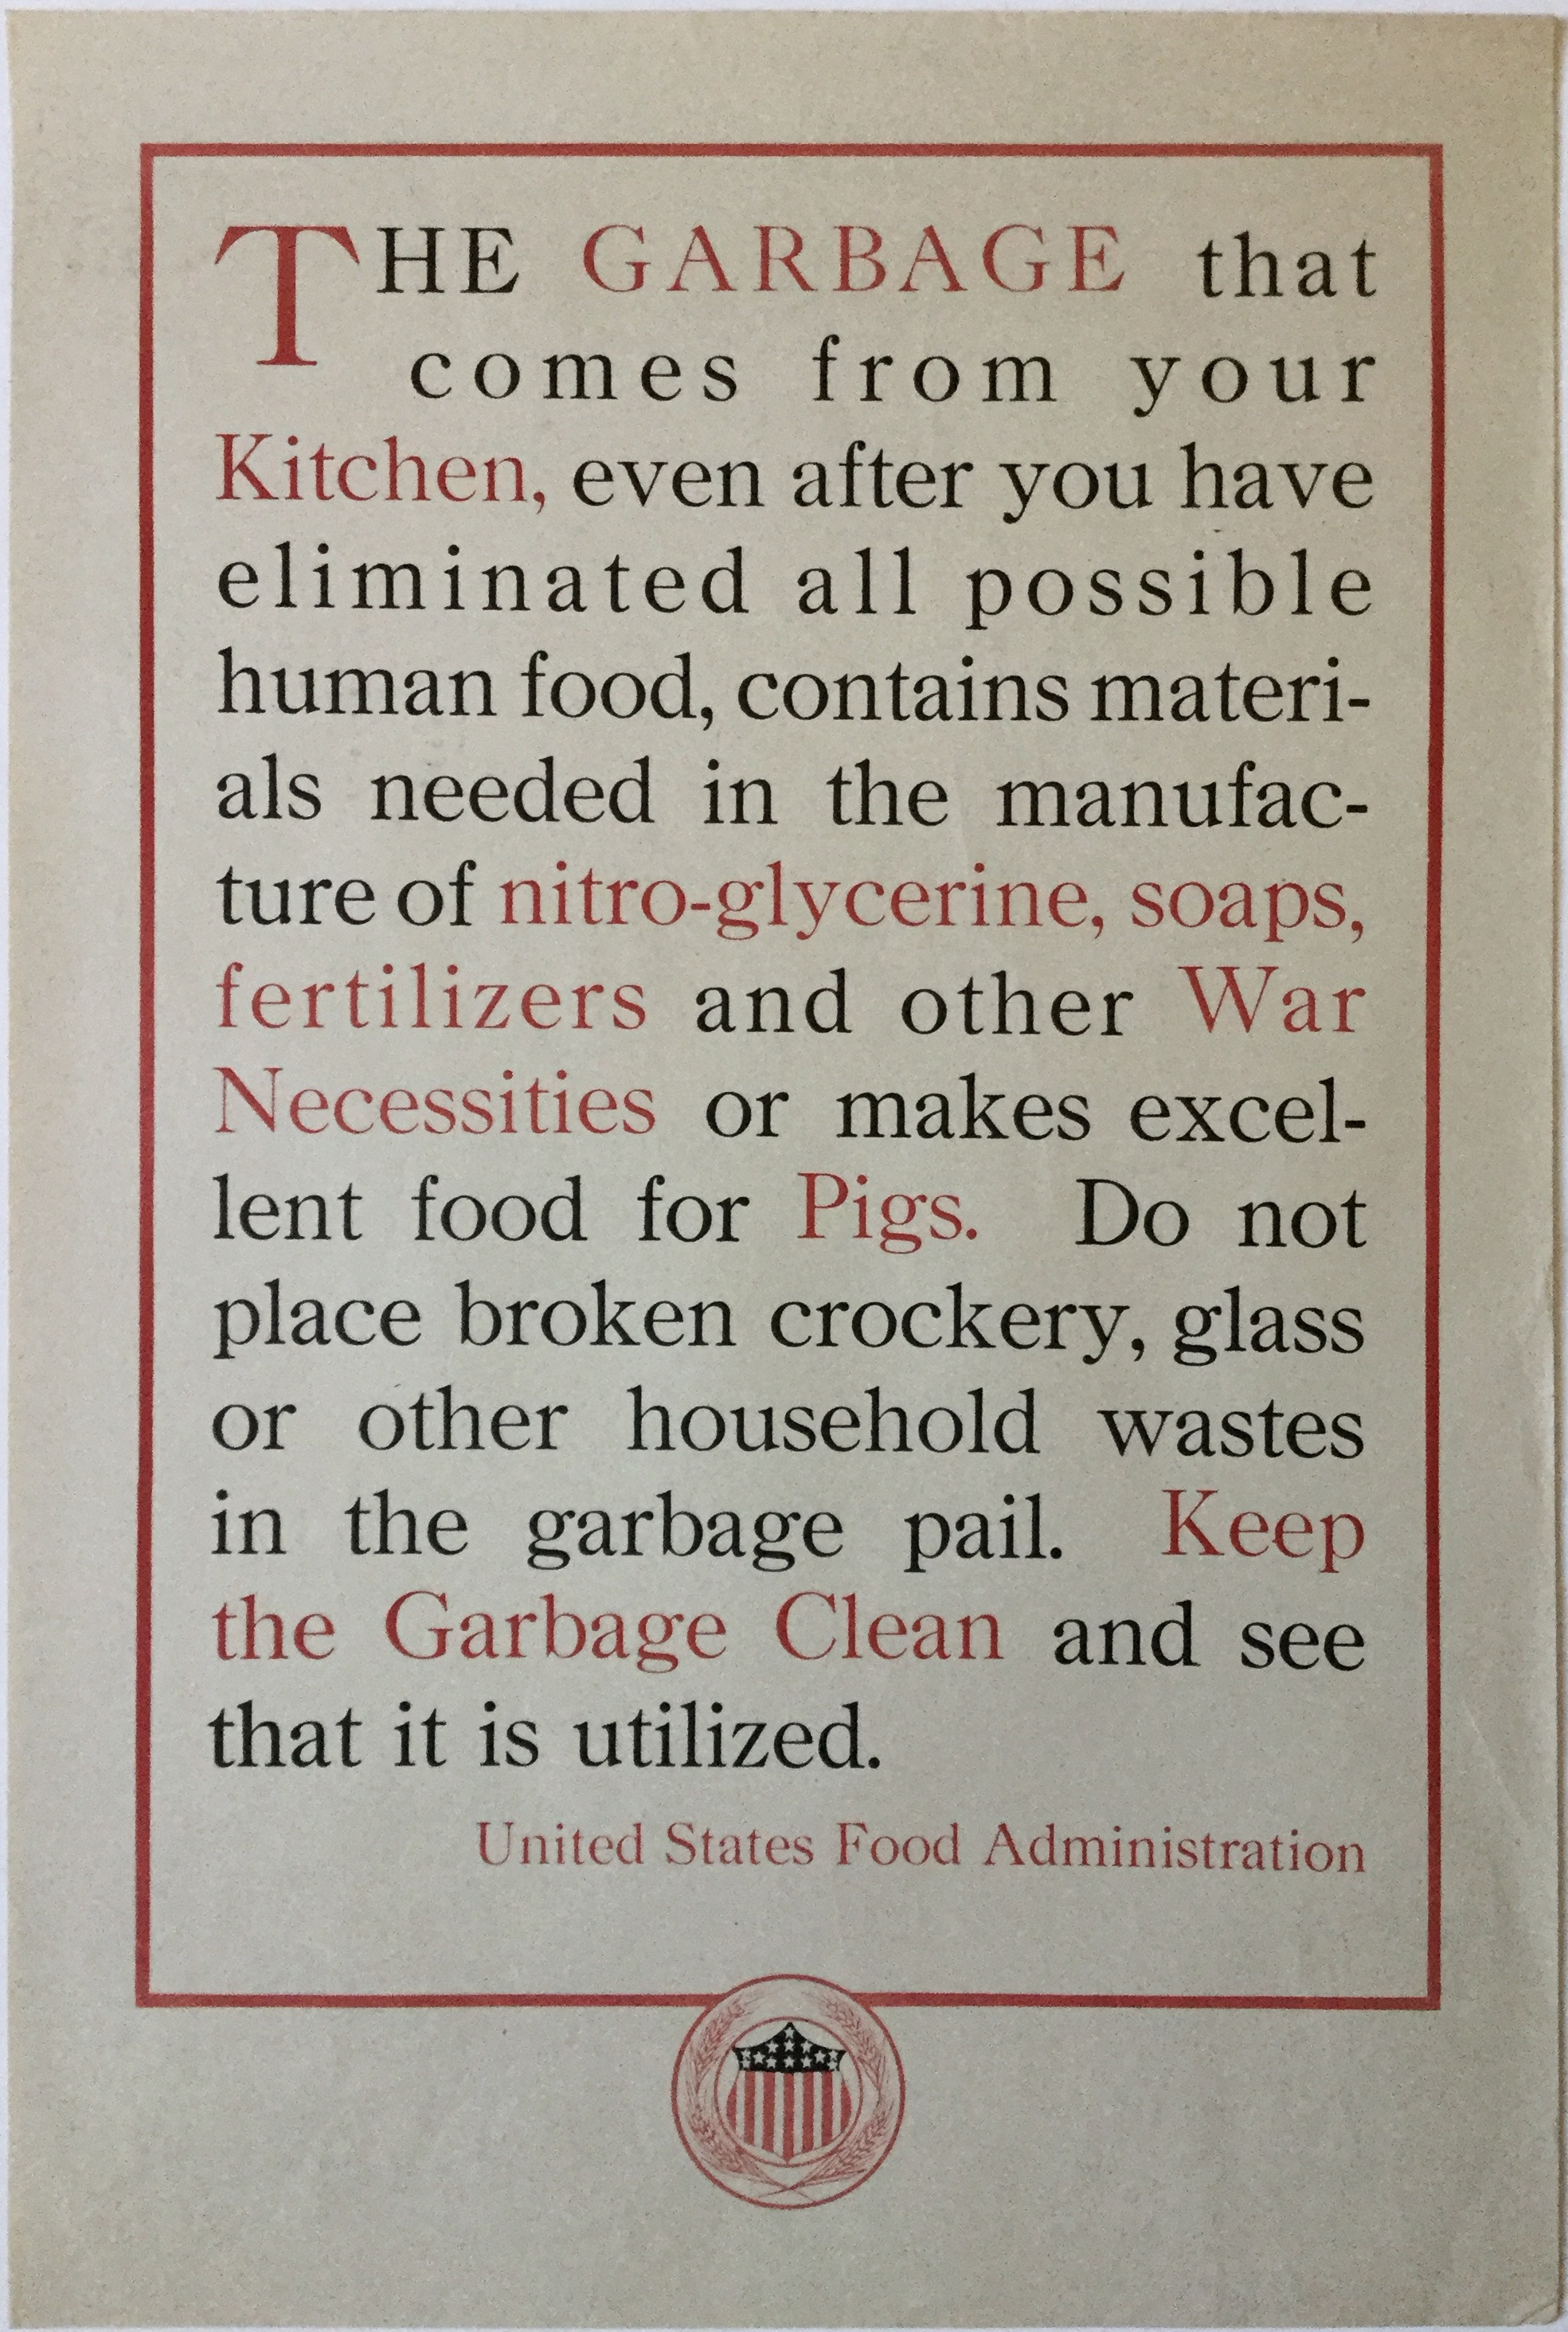 J390	UNITED STATES FOOD ADMINISTRATION - THE GARBAGE THAT COMES FROM YOUR KITCHEN…MAKES EXCELLENT FOOD FOR PIGS